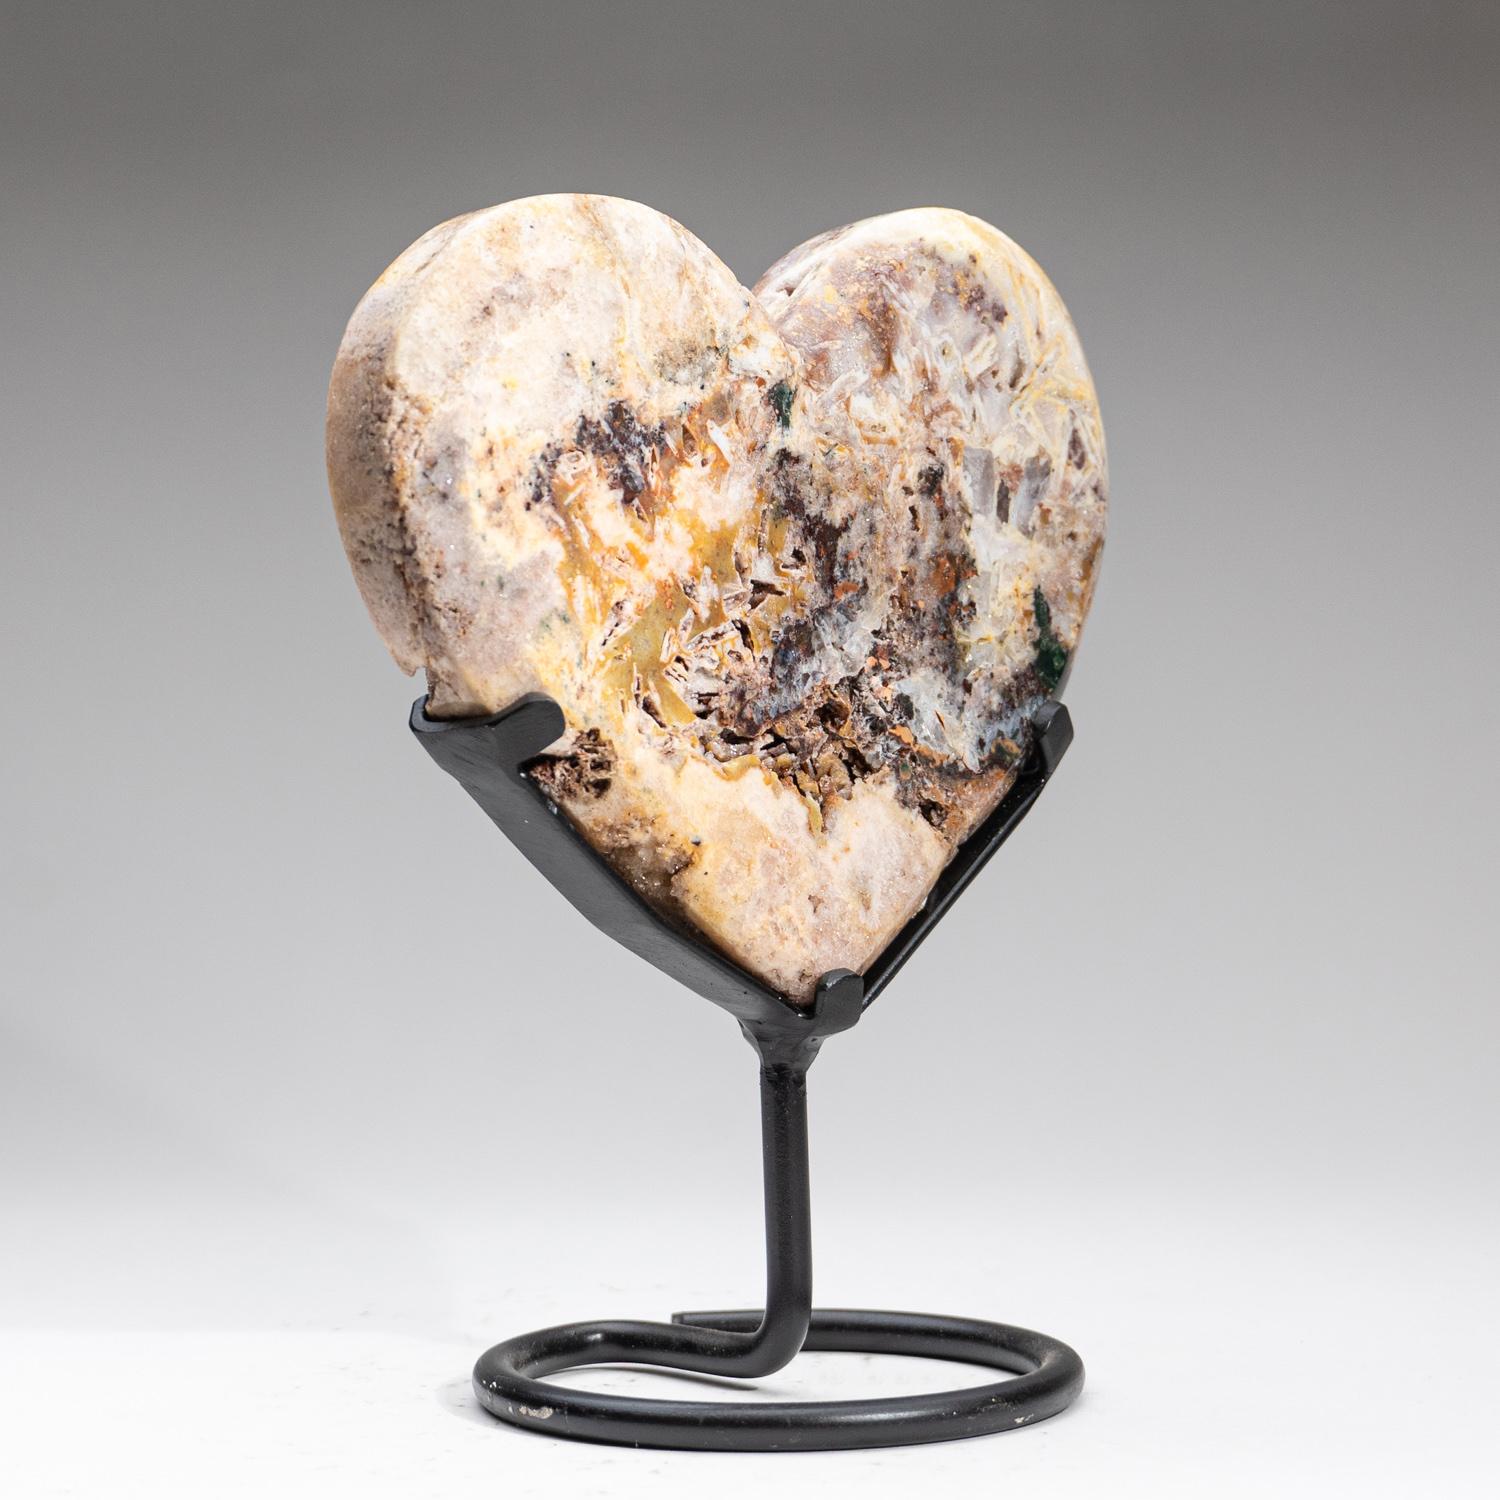 High quality, handmade polished natural Agate geode heart. This heart is carved from a solid cluster of crazy lace agate crystal with bright yellow and white coloration. 

Crazy Lace Agate with its twisting and turning bands is elegant and